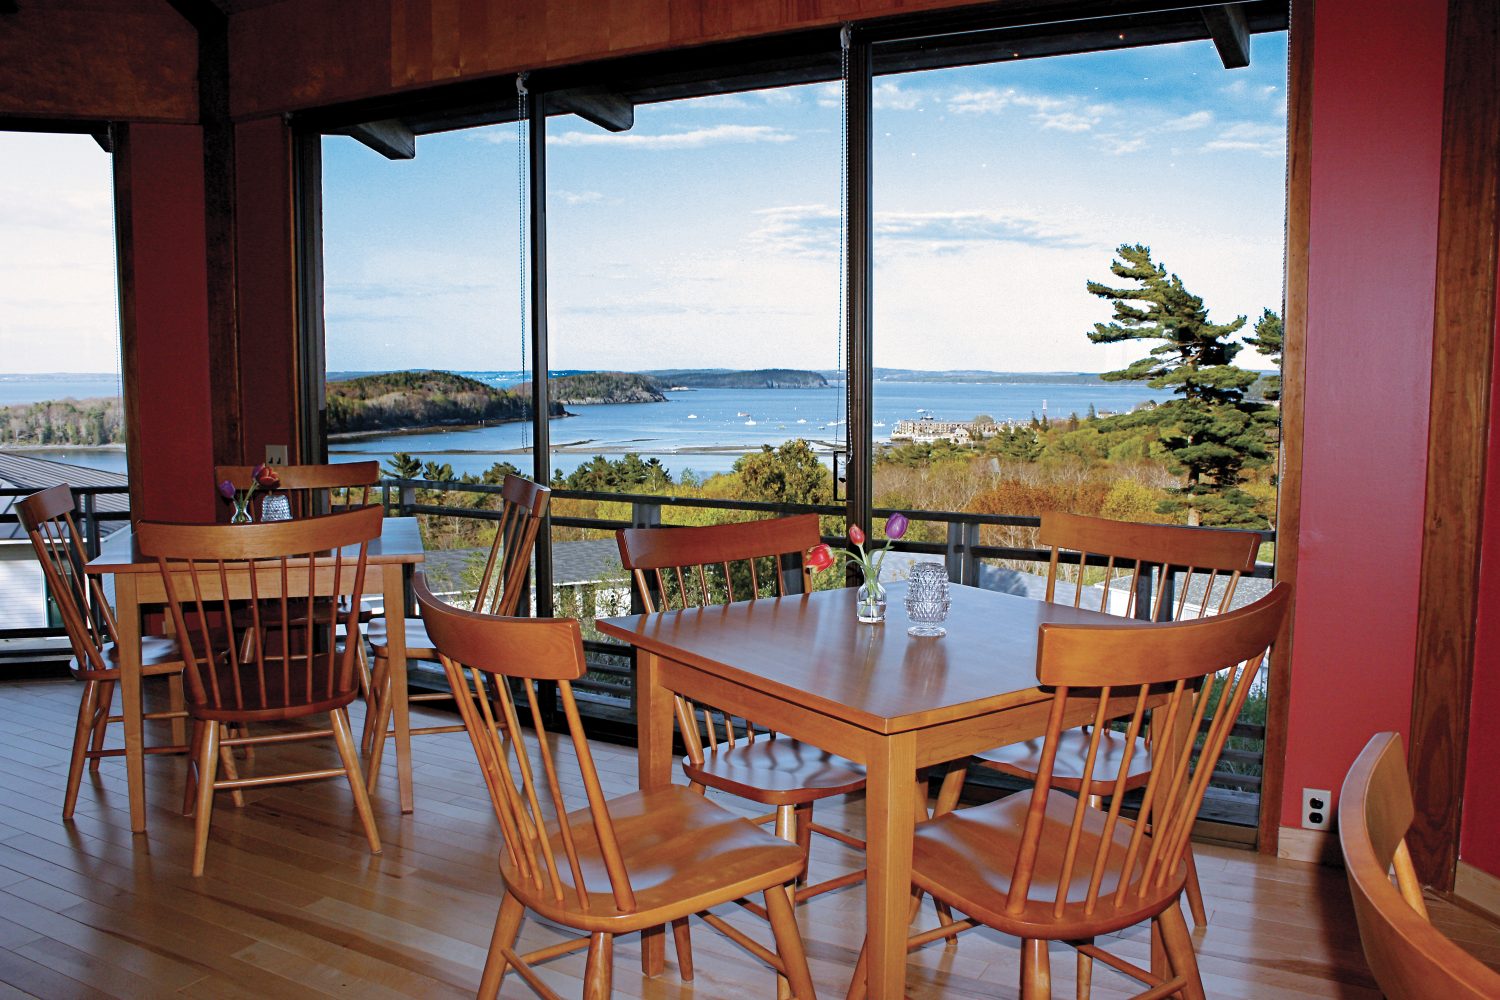 View Of Bar Harbor From The Looking Glass Restaurant